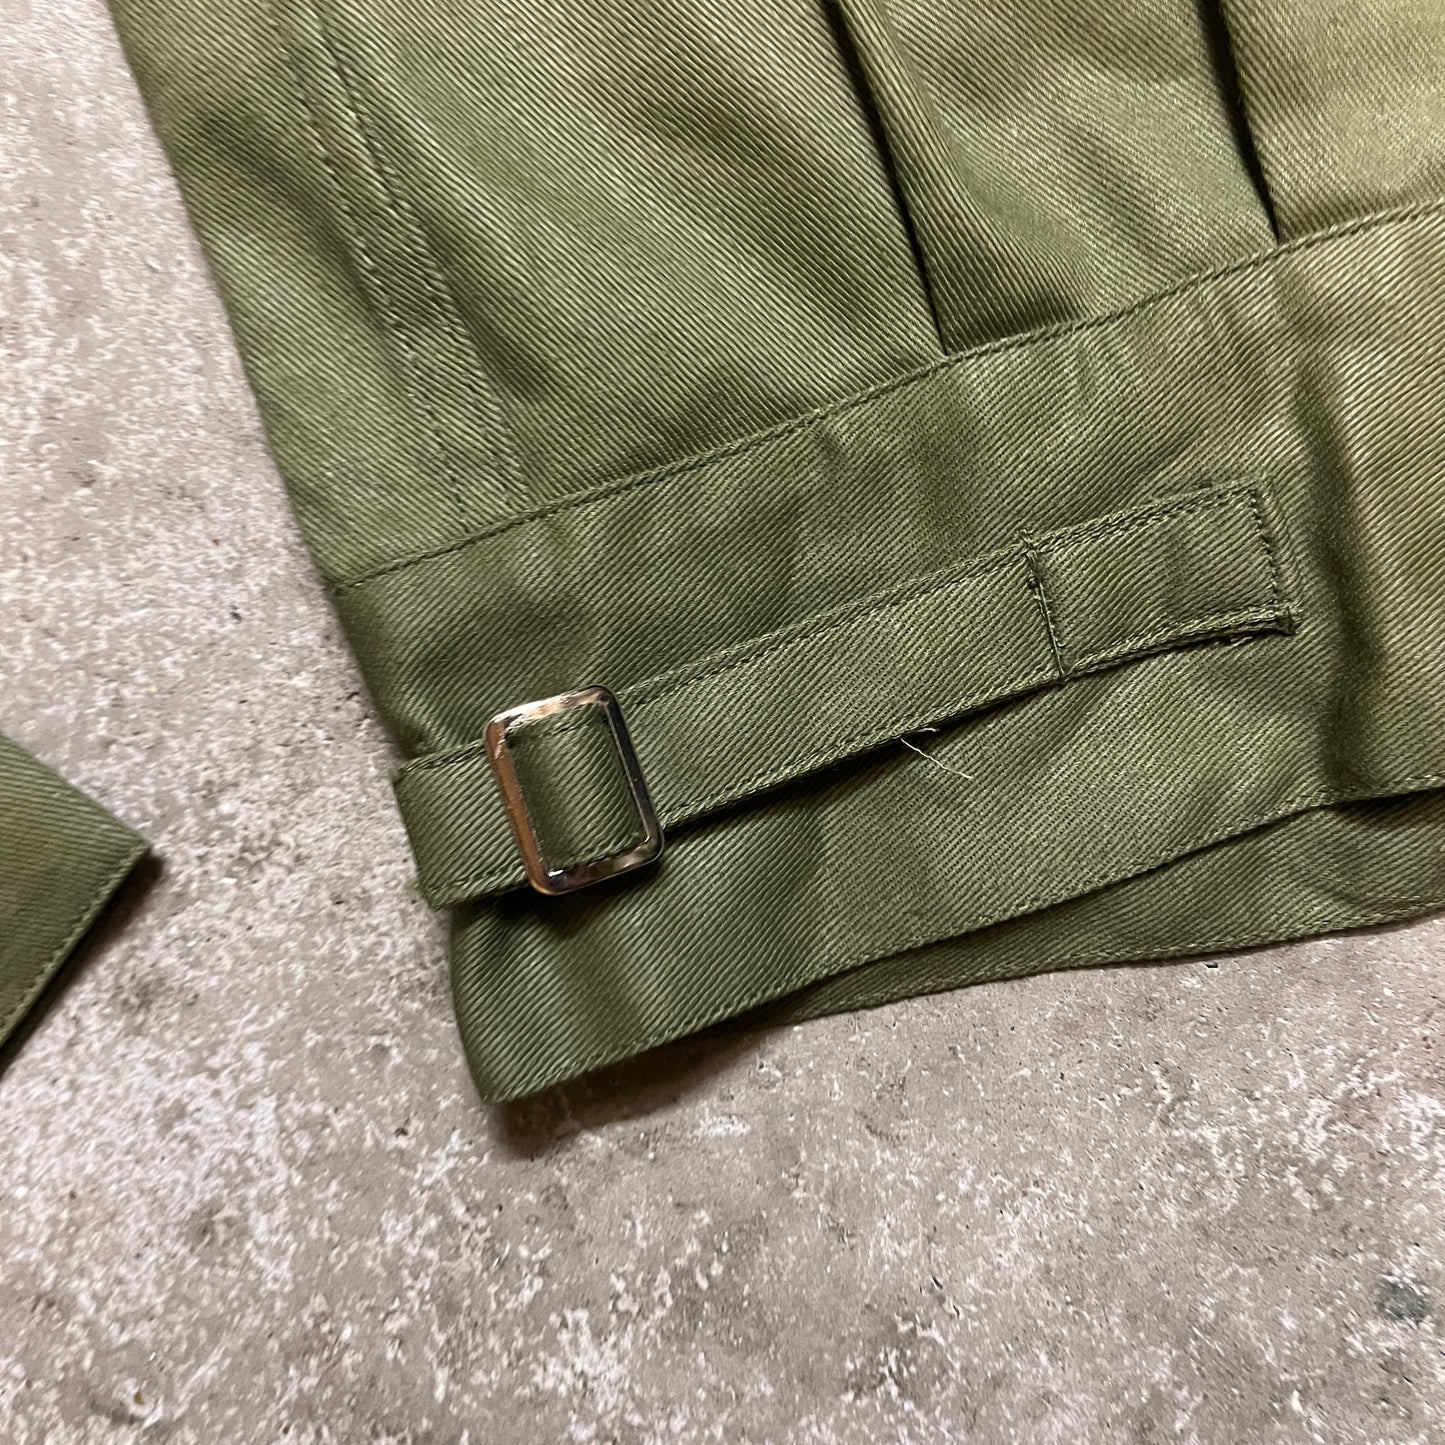 1960s Army Cyclist Jacket With 1940s Lightning Zipper